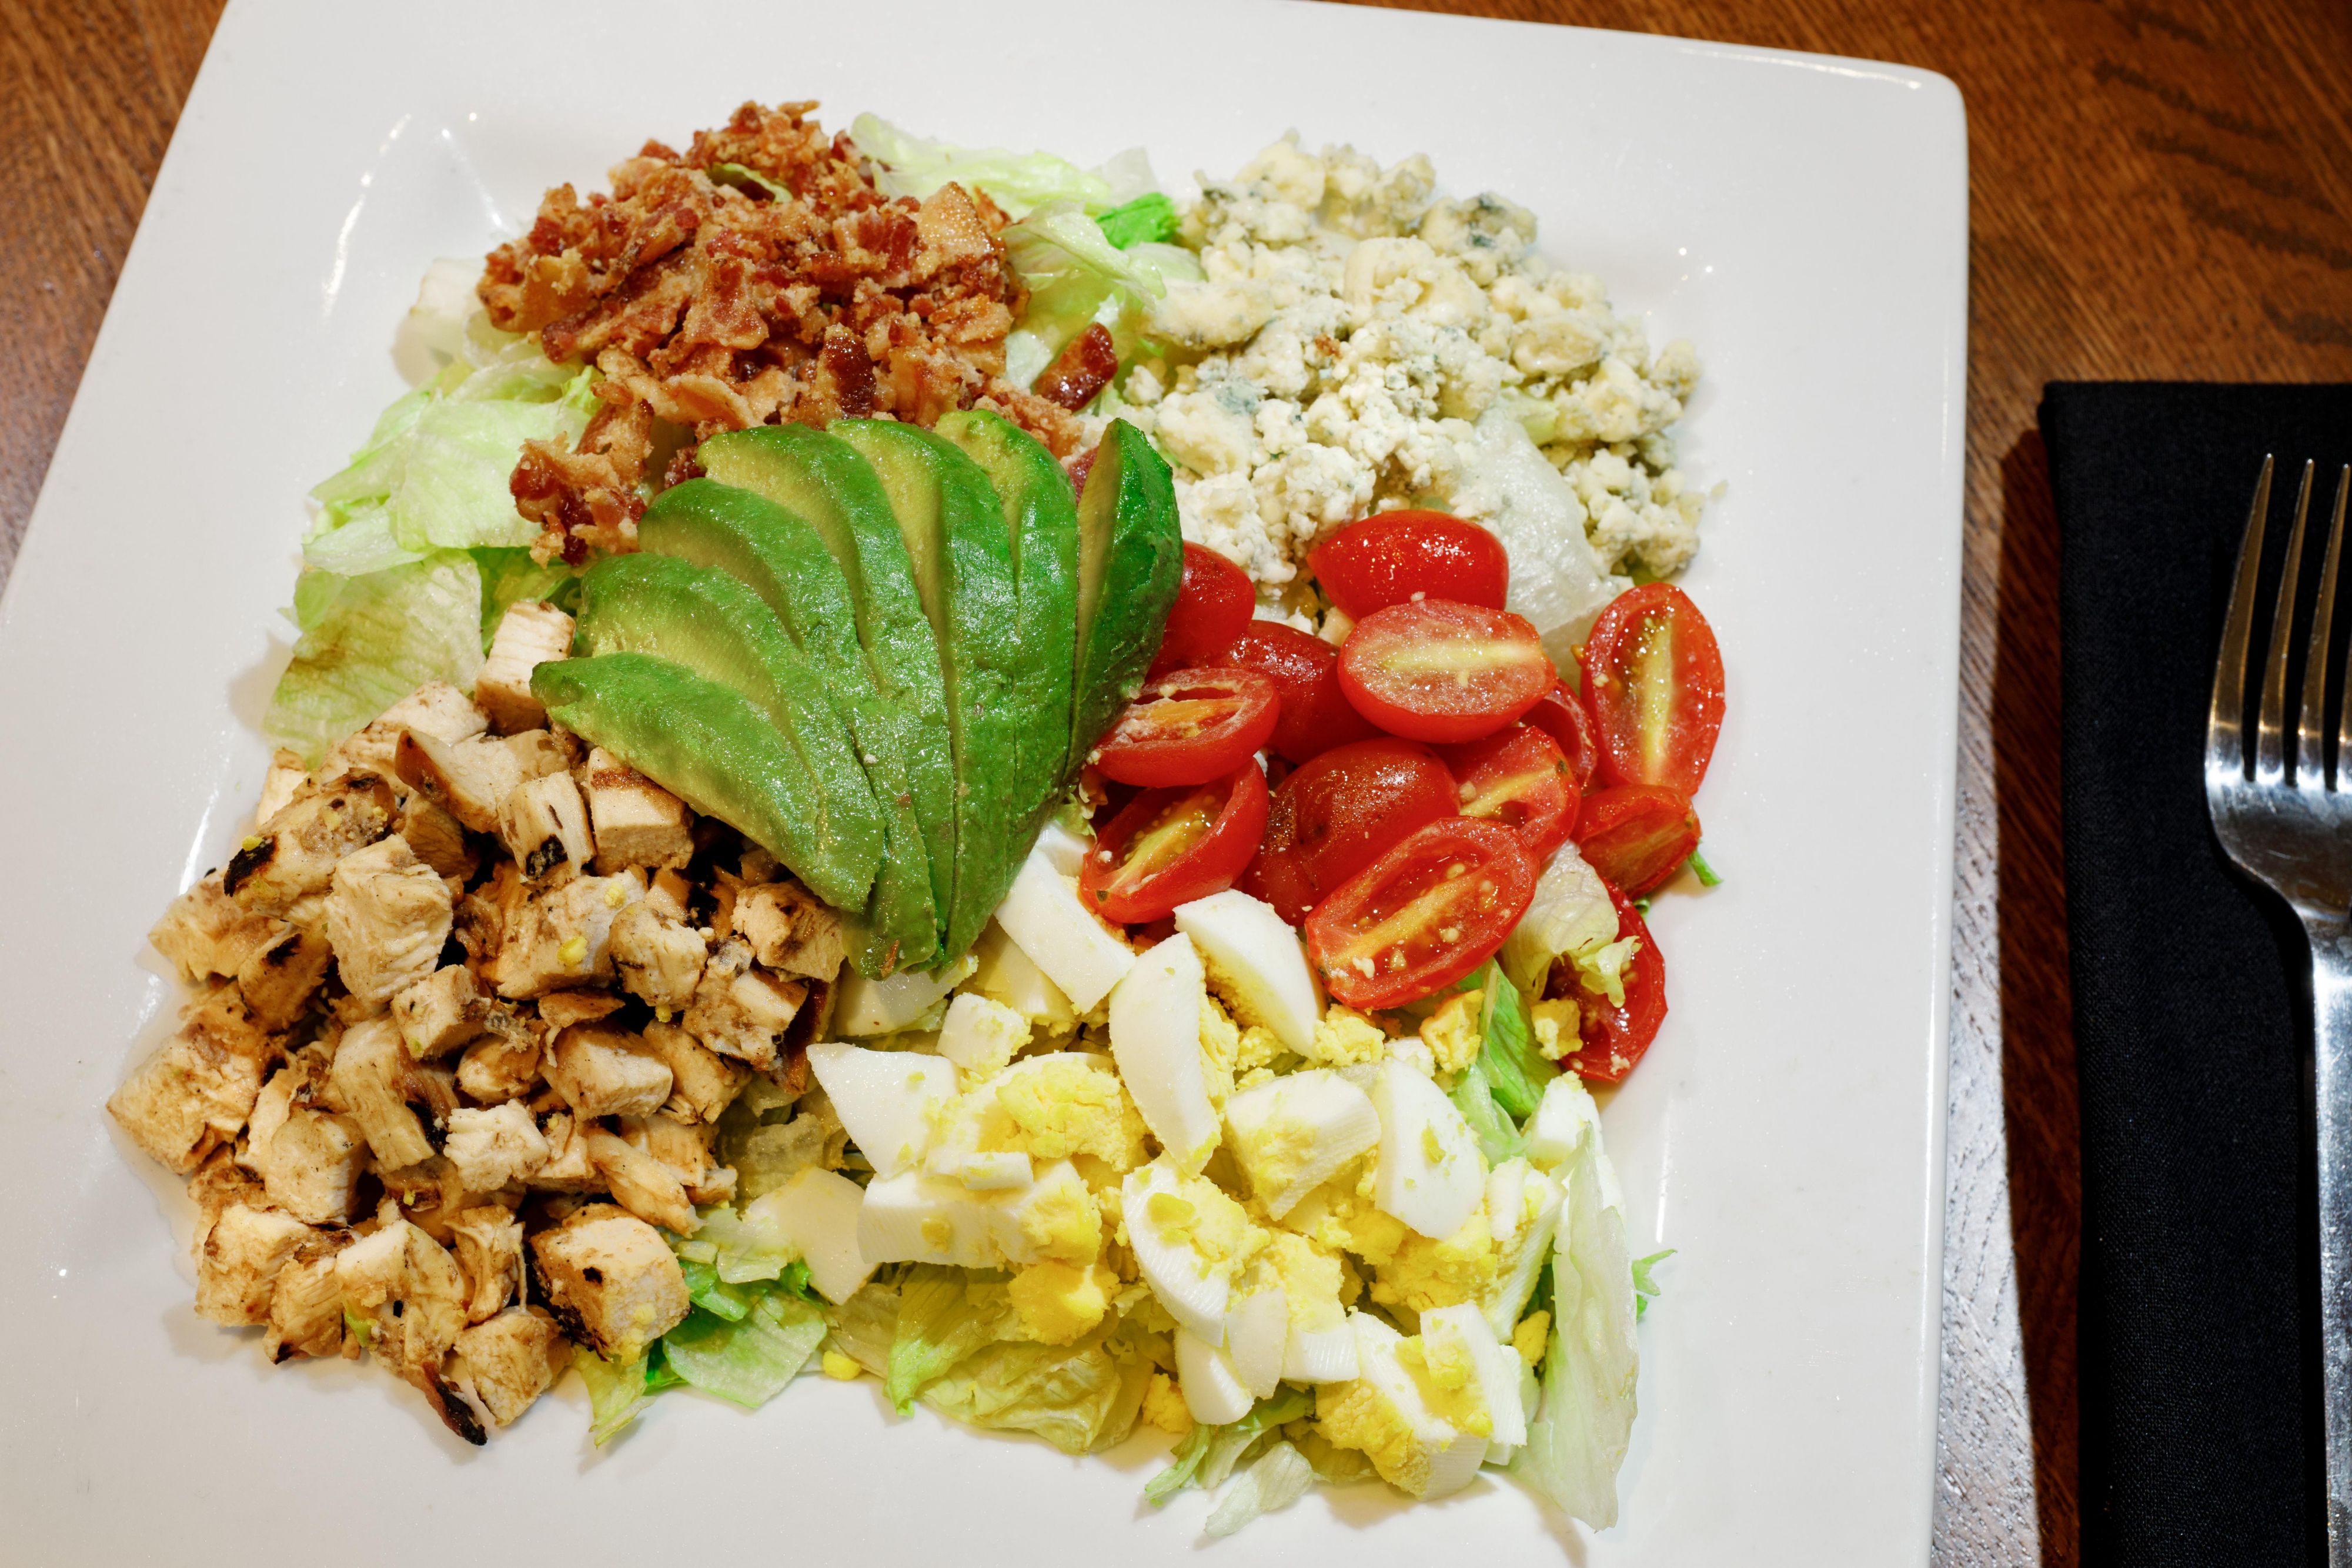 Stay healthy while on the road to Memphis and enjoy our salads.